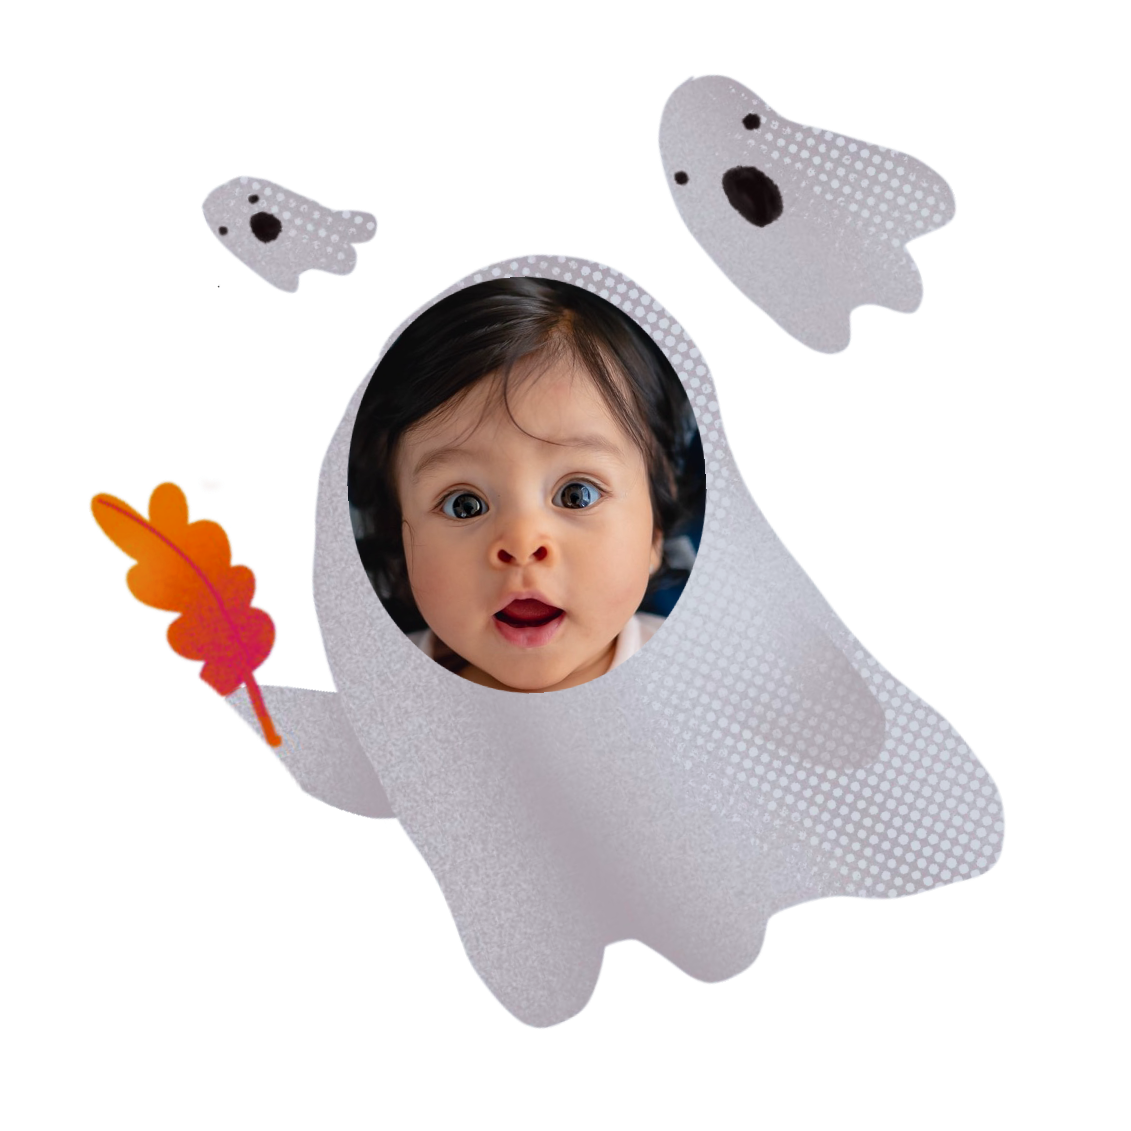 A Little Girl In A Ghost Costume Holding A Flower Halloween Stickers Template